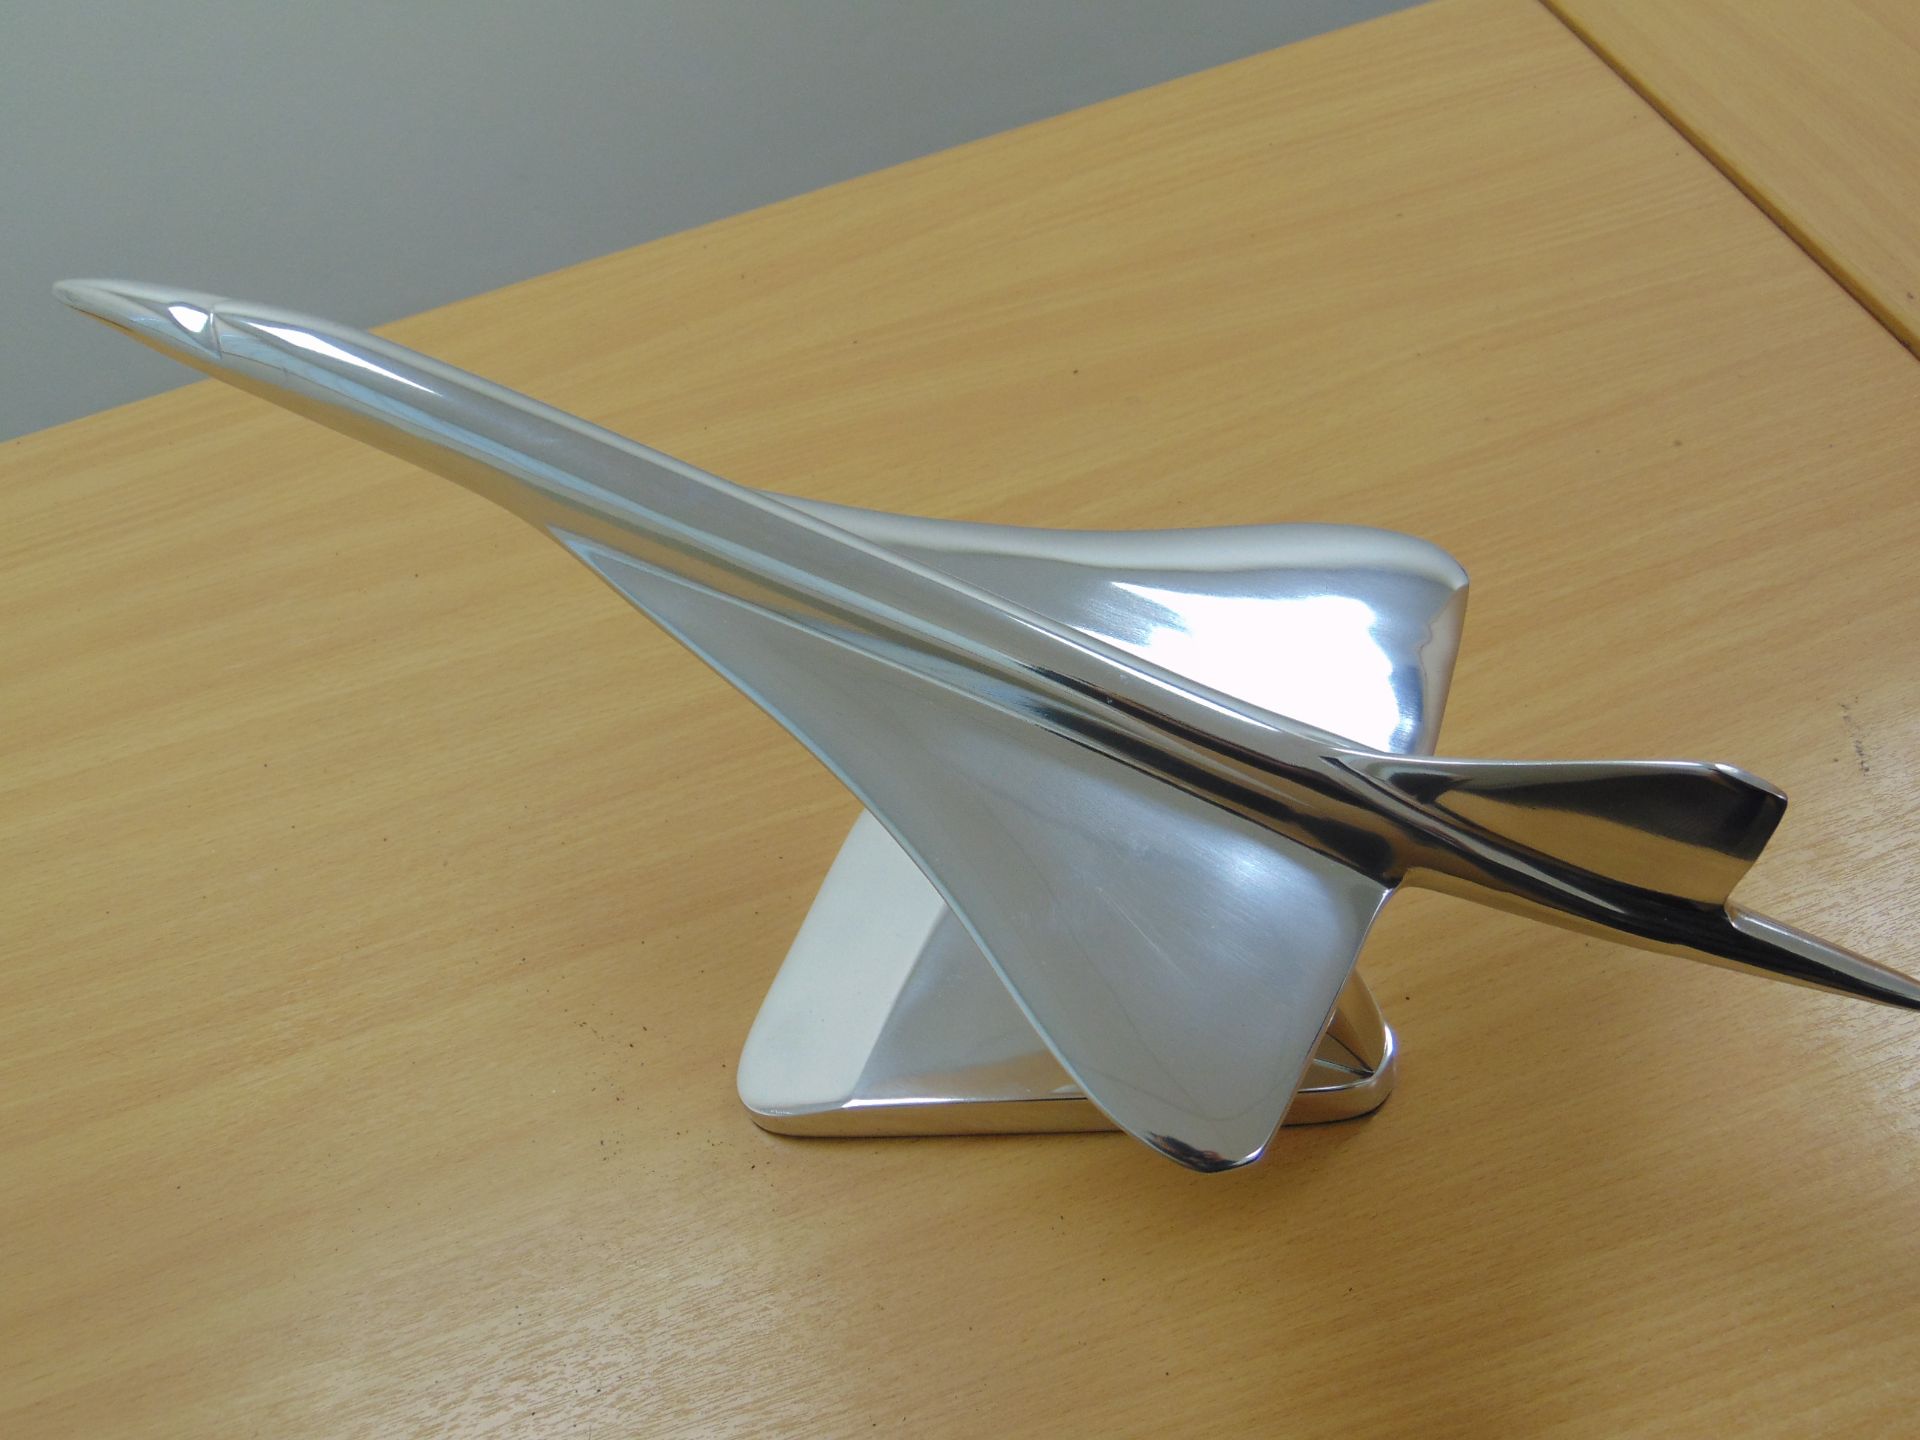 STUNNING POLISHED ALLUMINUM DESK TOP MODEL OF A CONCORD IN FLIGHT ON STAND - Image 2 of 12